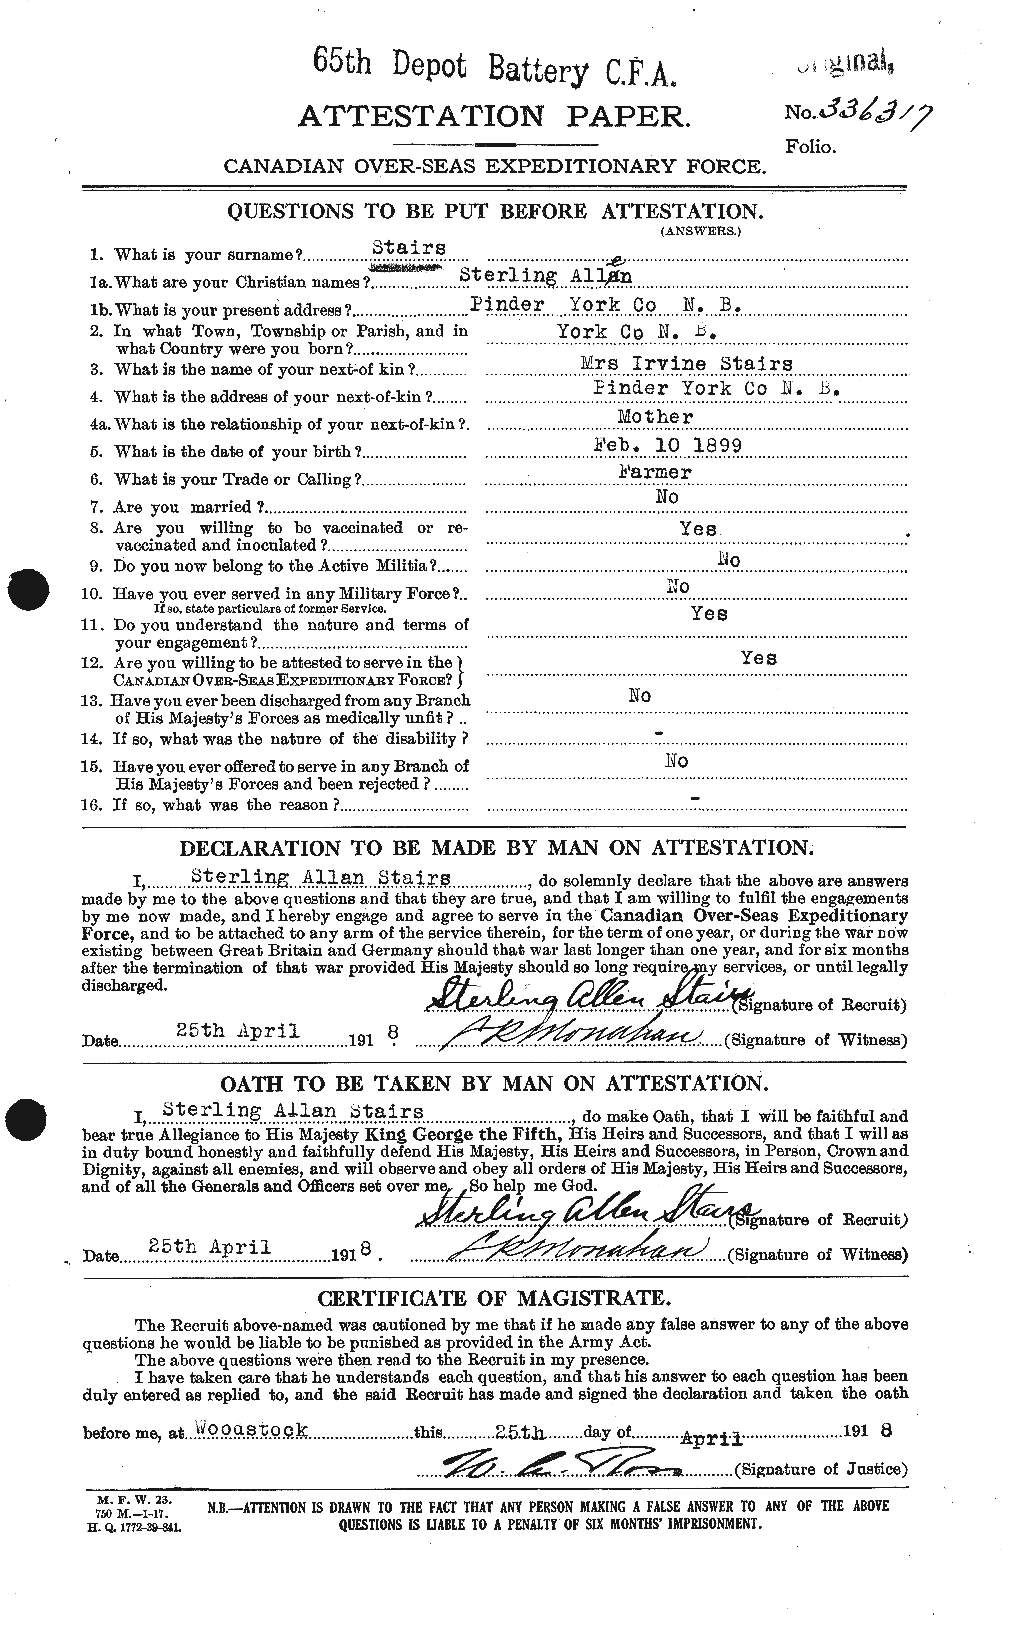 Personnel Records of the First World War - CEF 116680a